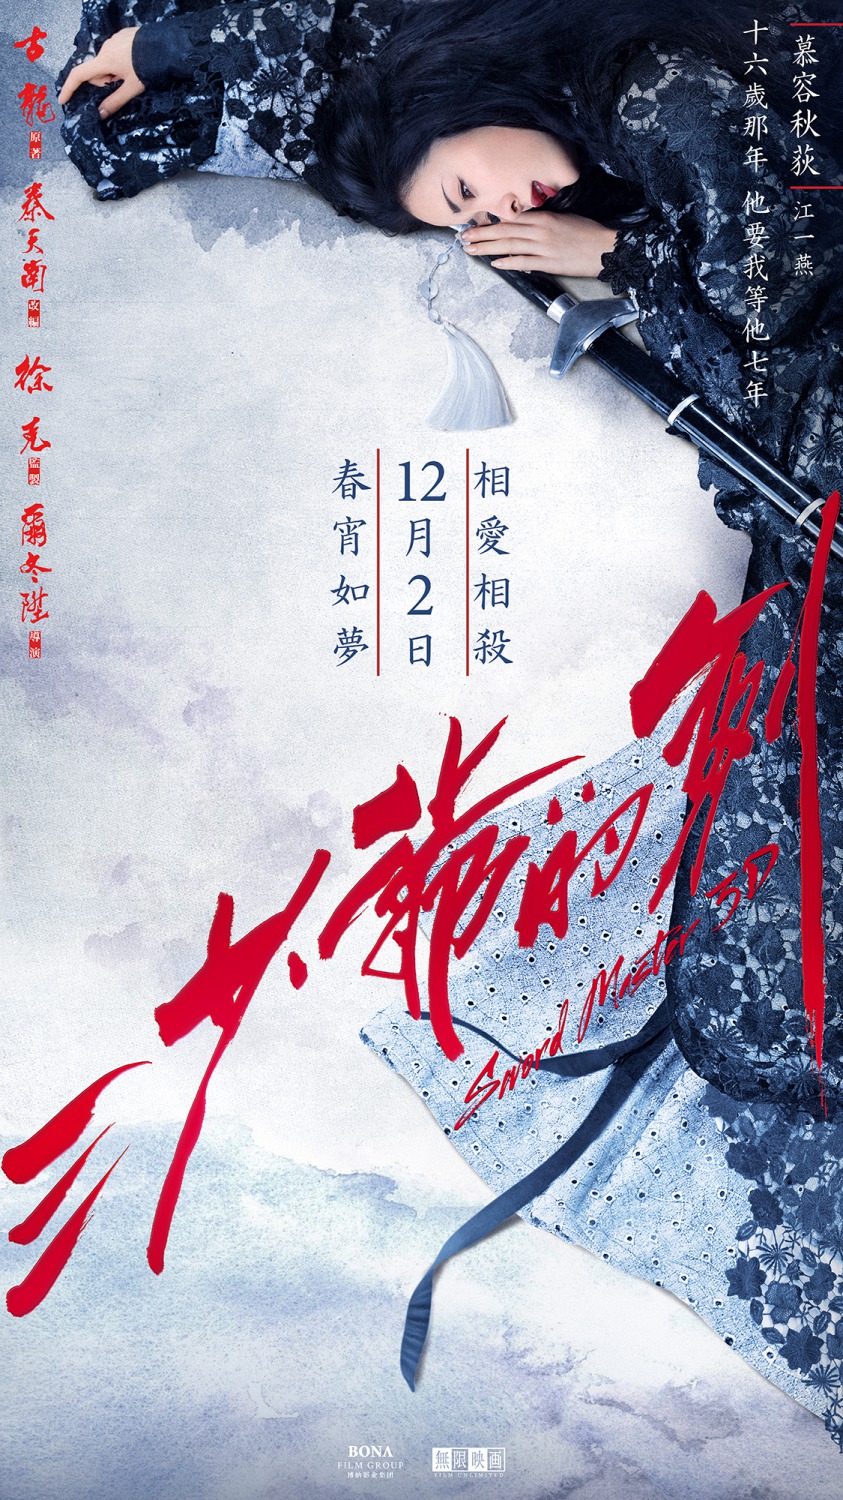 Extra Large Movie Poster Image for San shao ye de jian (#6 of 11)